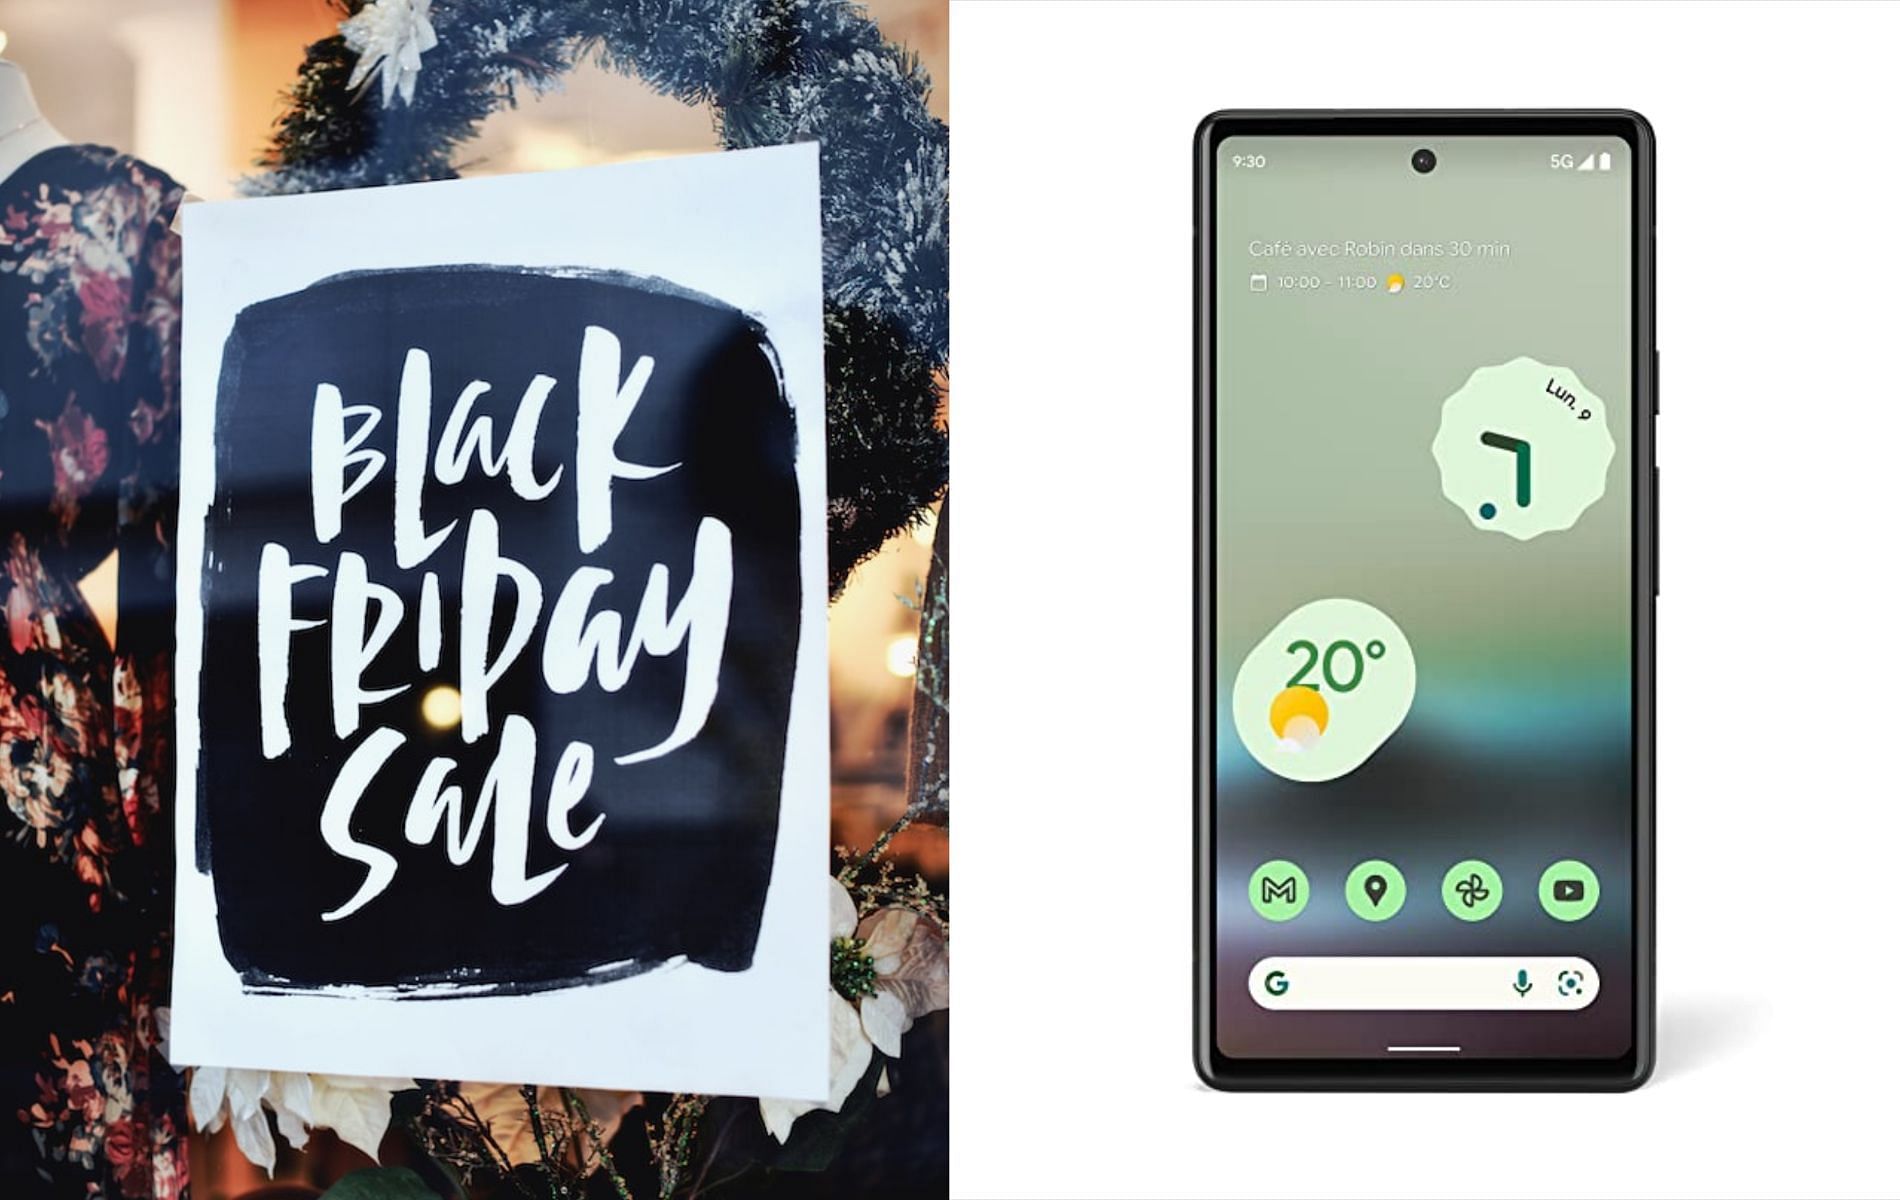 Google Pixel 6A has become a must grab smartphone this Black Friday (Image via Google)